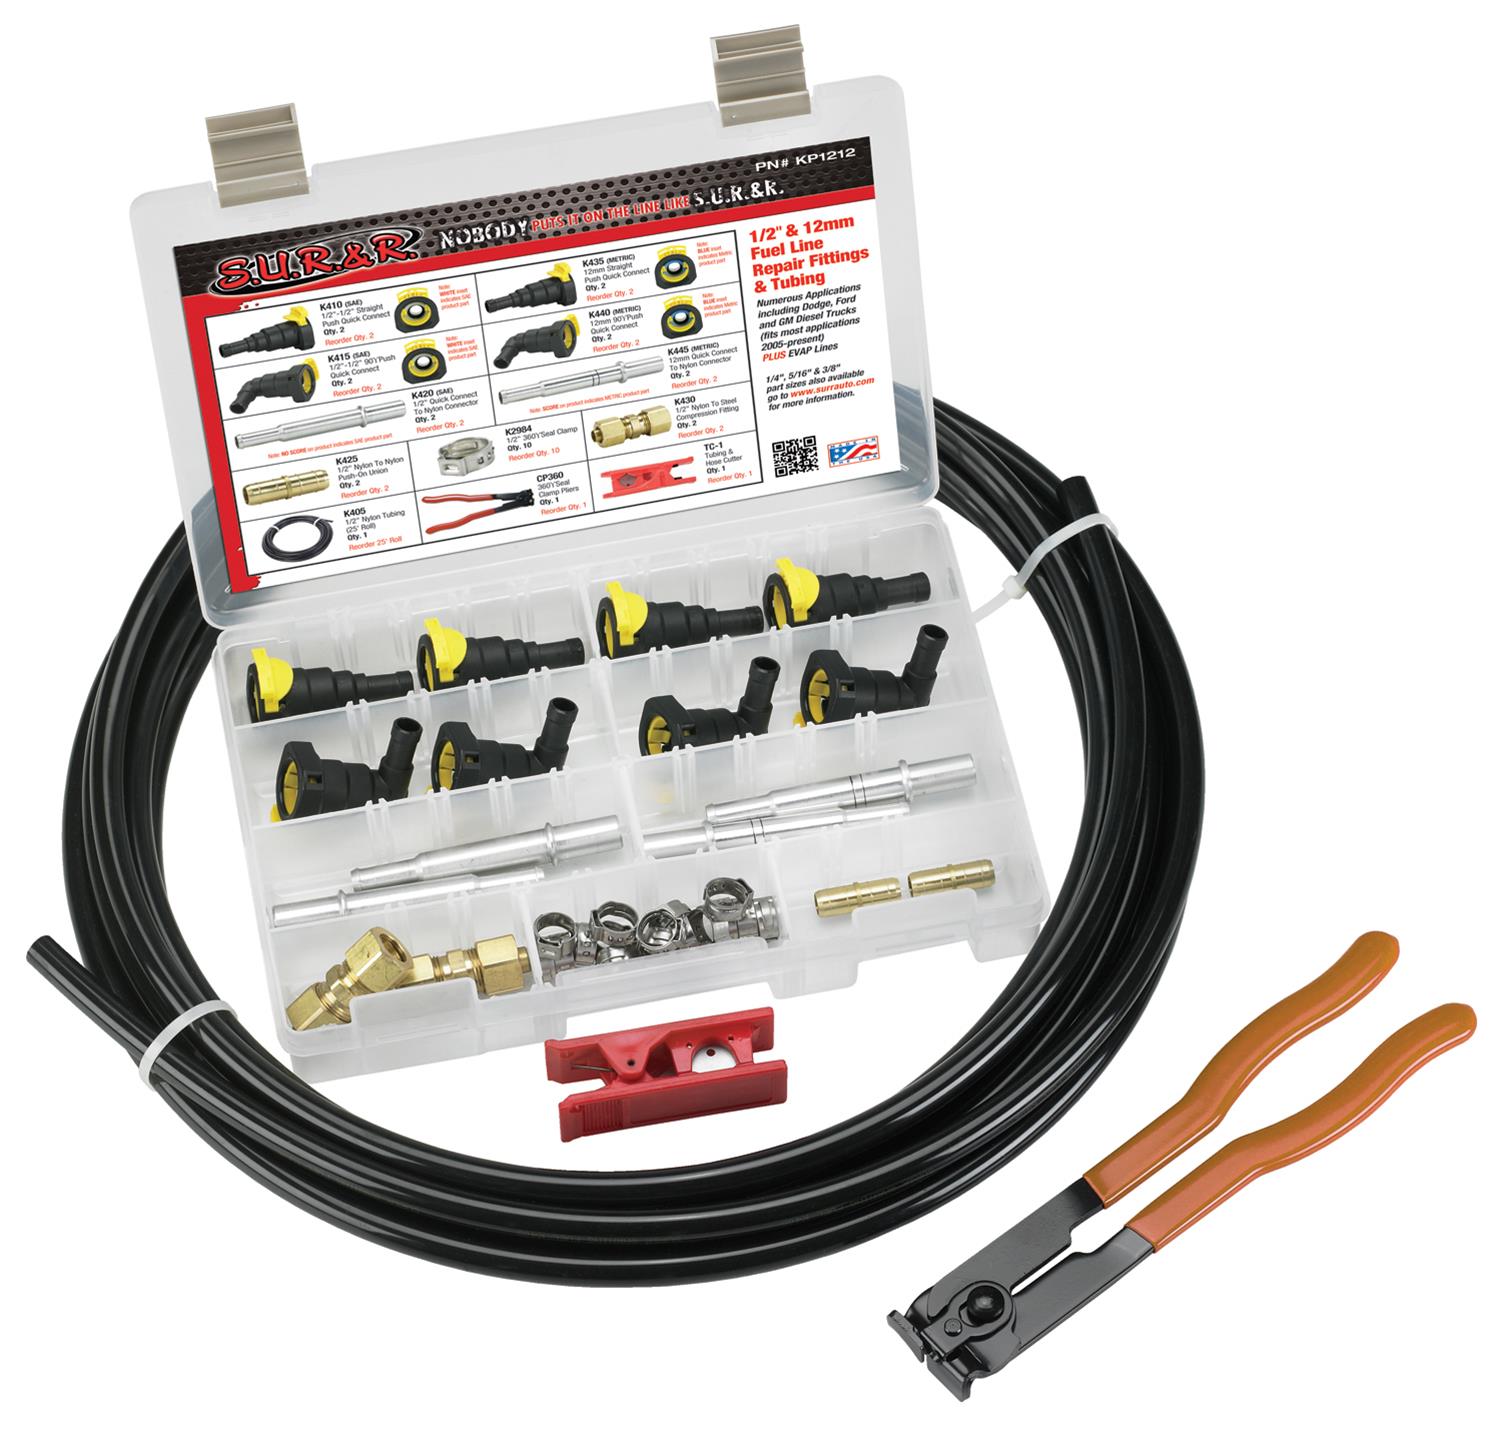 S.U.R. & R KP1212 1/2 & 12mm Fuel Line Replacement Kit